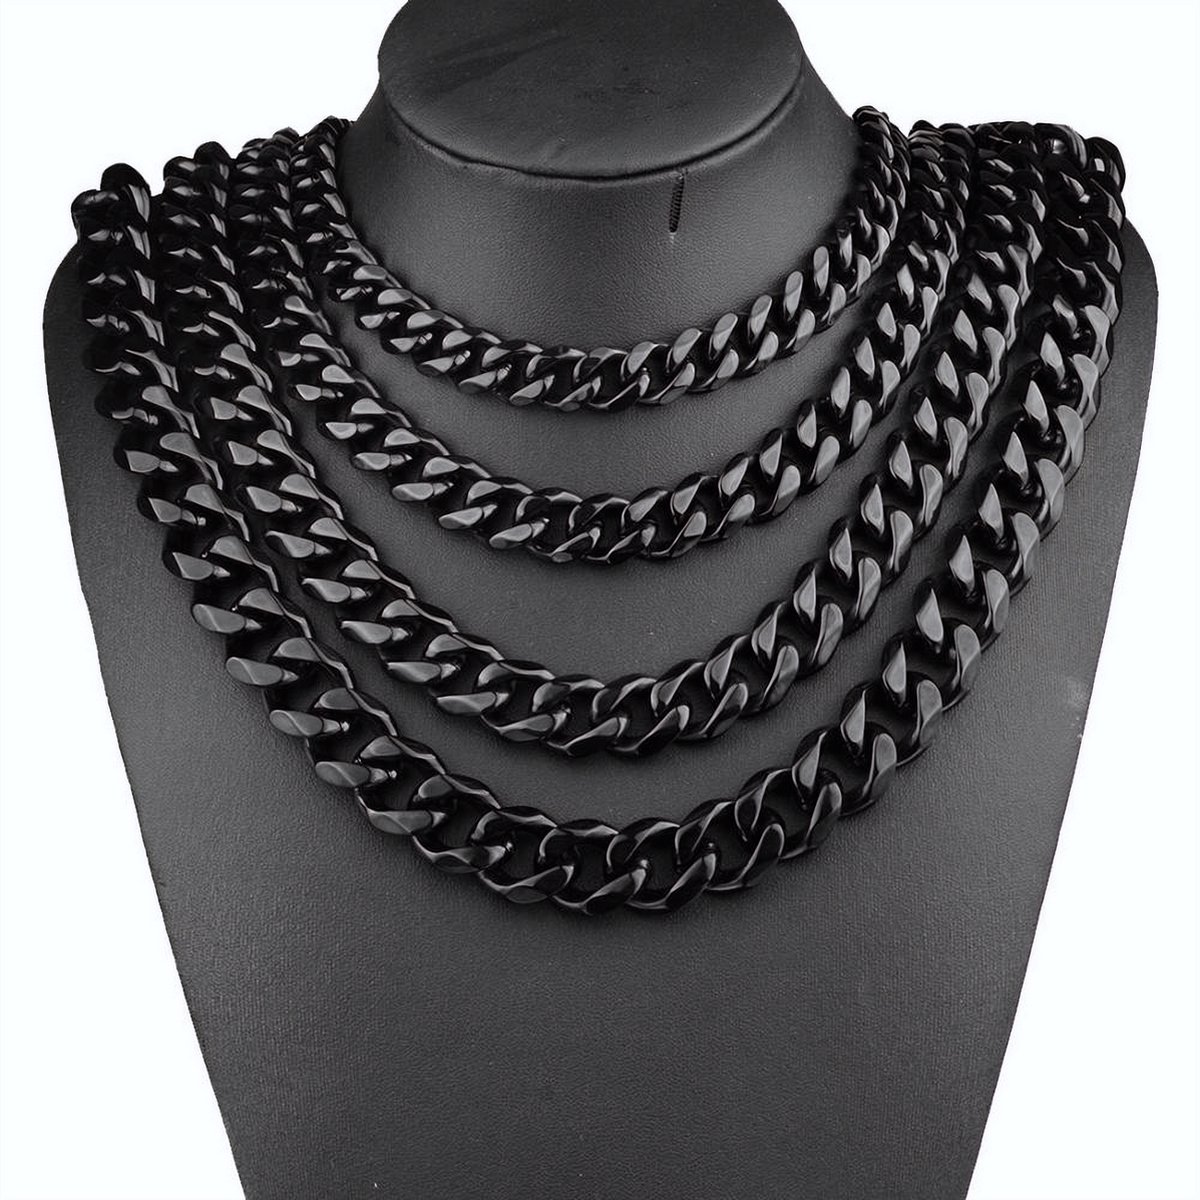 ICYBOY Massieve Zwarten Stalen Herenketting Stalen Roestvrije Staal Zwart [CLASSIC] [BLACKED OUT] [ICED OUT] [12mm - 60 cm] Stainless Steel Chain Silver Miami Cuban Chunky Necklace